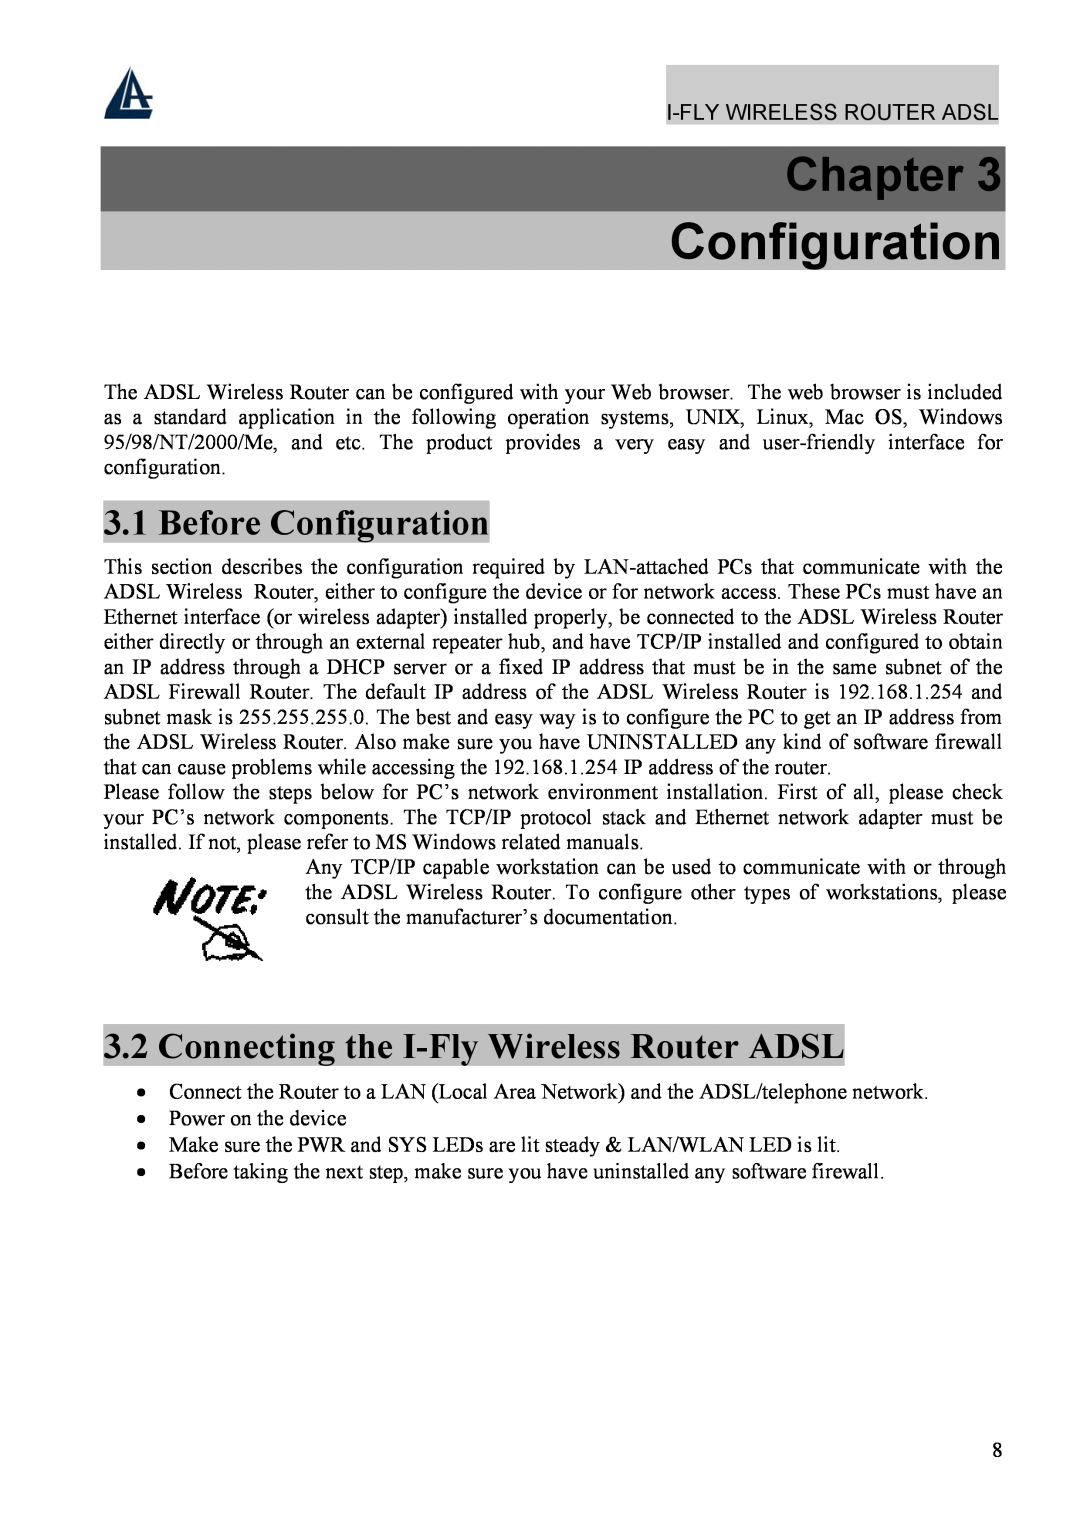 Atlantis Land A02-WRA4-54G manual Before Configuration, Connecting the I-Fly Wireless Router ADSL, Chapter 